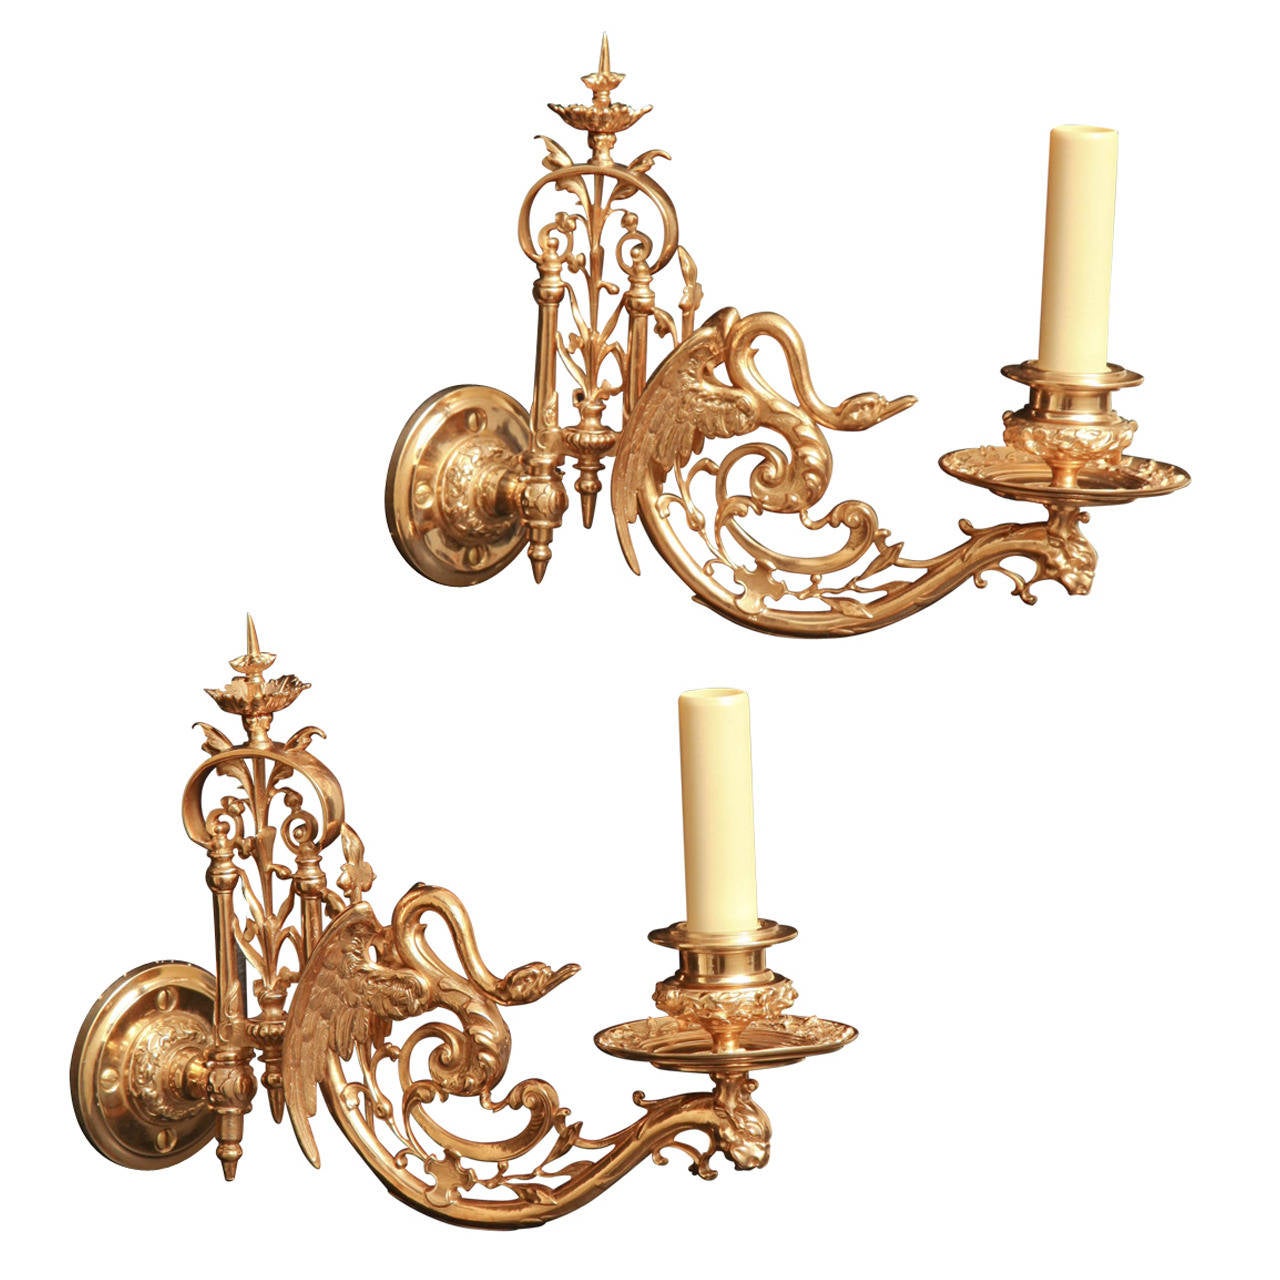 Pair of Napoleon III Swing Arm Sconces with Swan Motif by Barbedienne For Sale